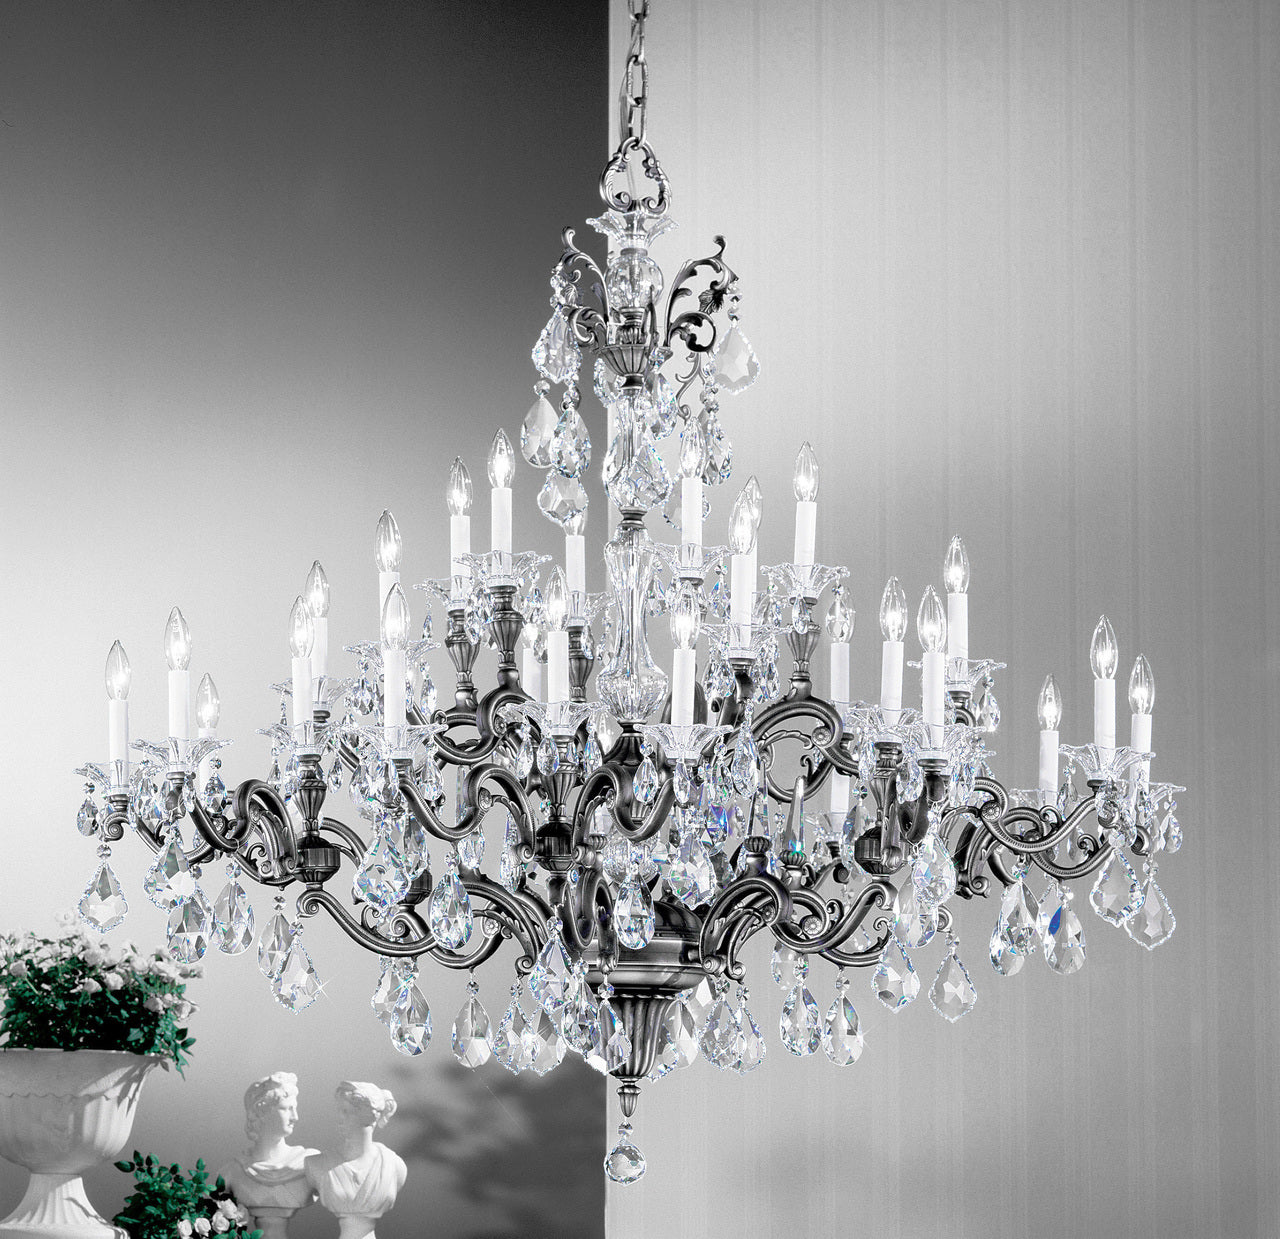 Classic Lighting 57130 MS SC Via Firenze Crystal Chandelier in Millennium Silver (Imported from Spain)